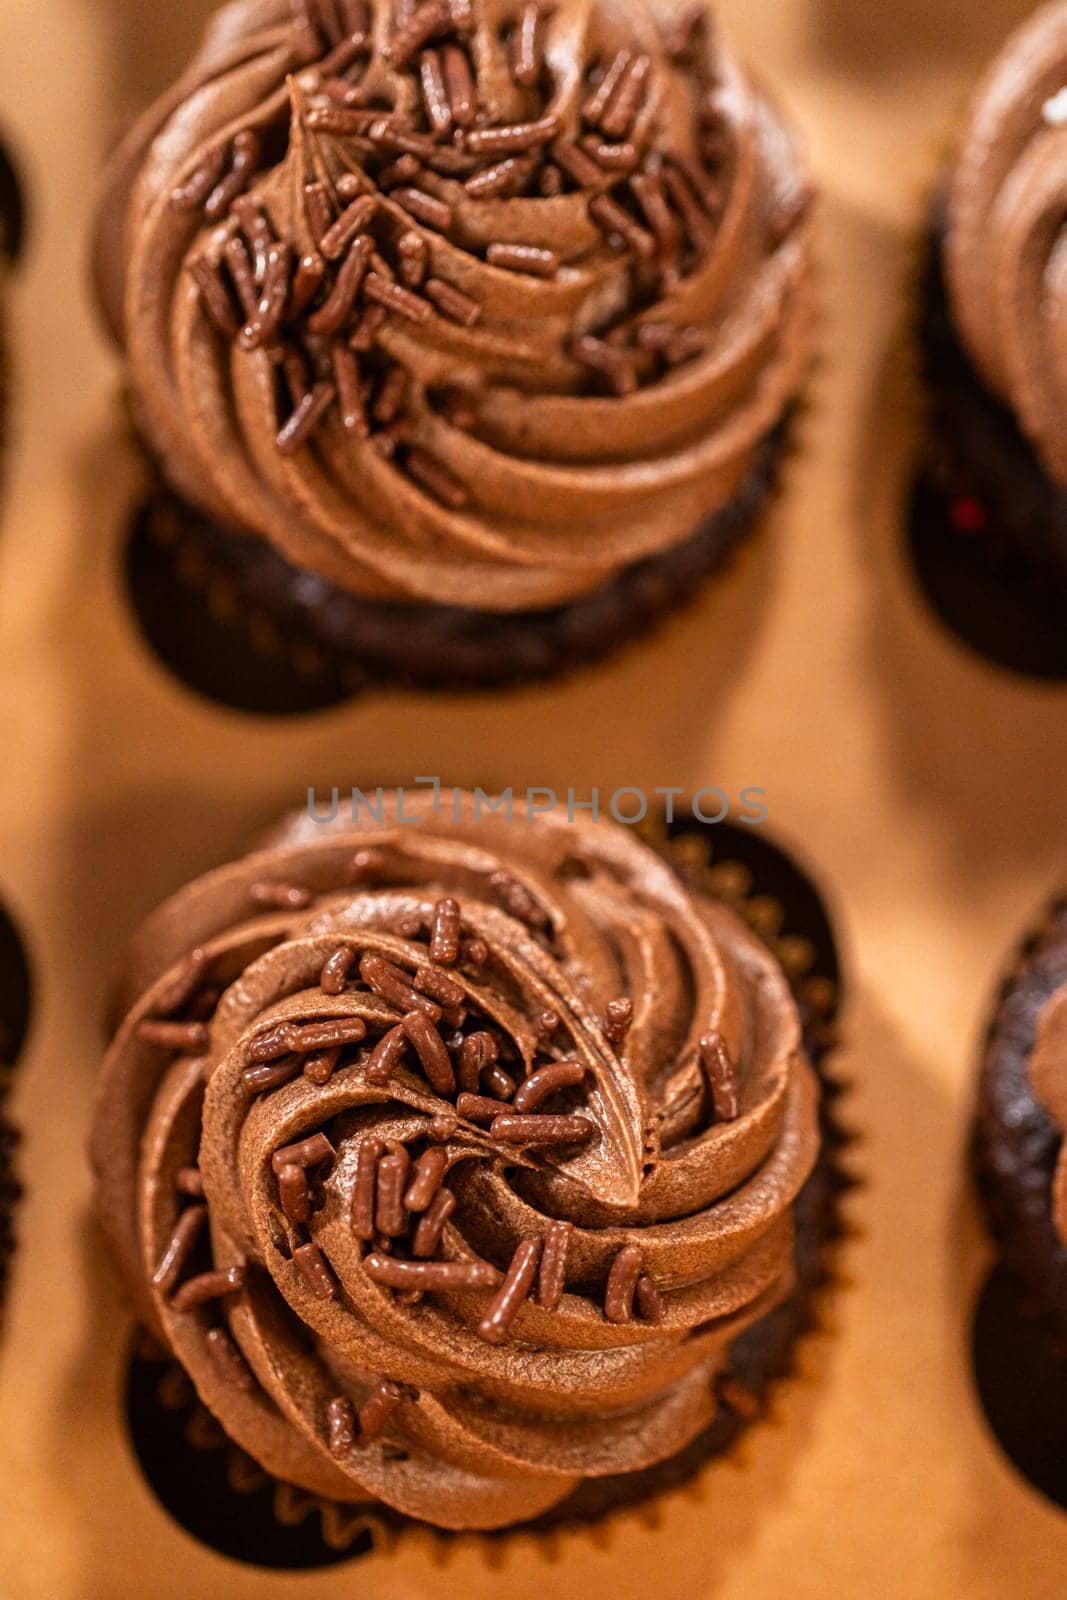 Preparing to share the delicious chocolate cupcakes, the final step involves carefully packaging them into a brown paper cupcake box.